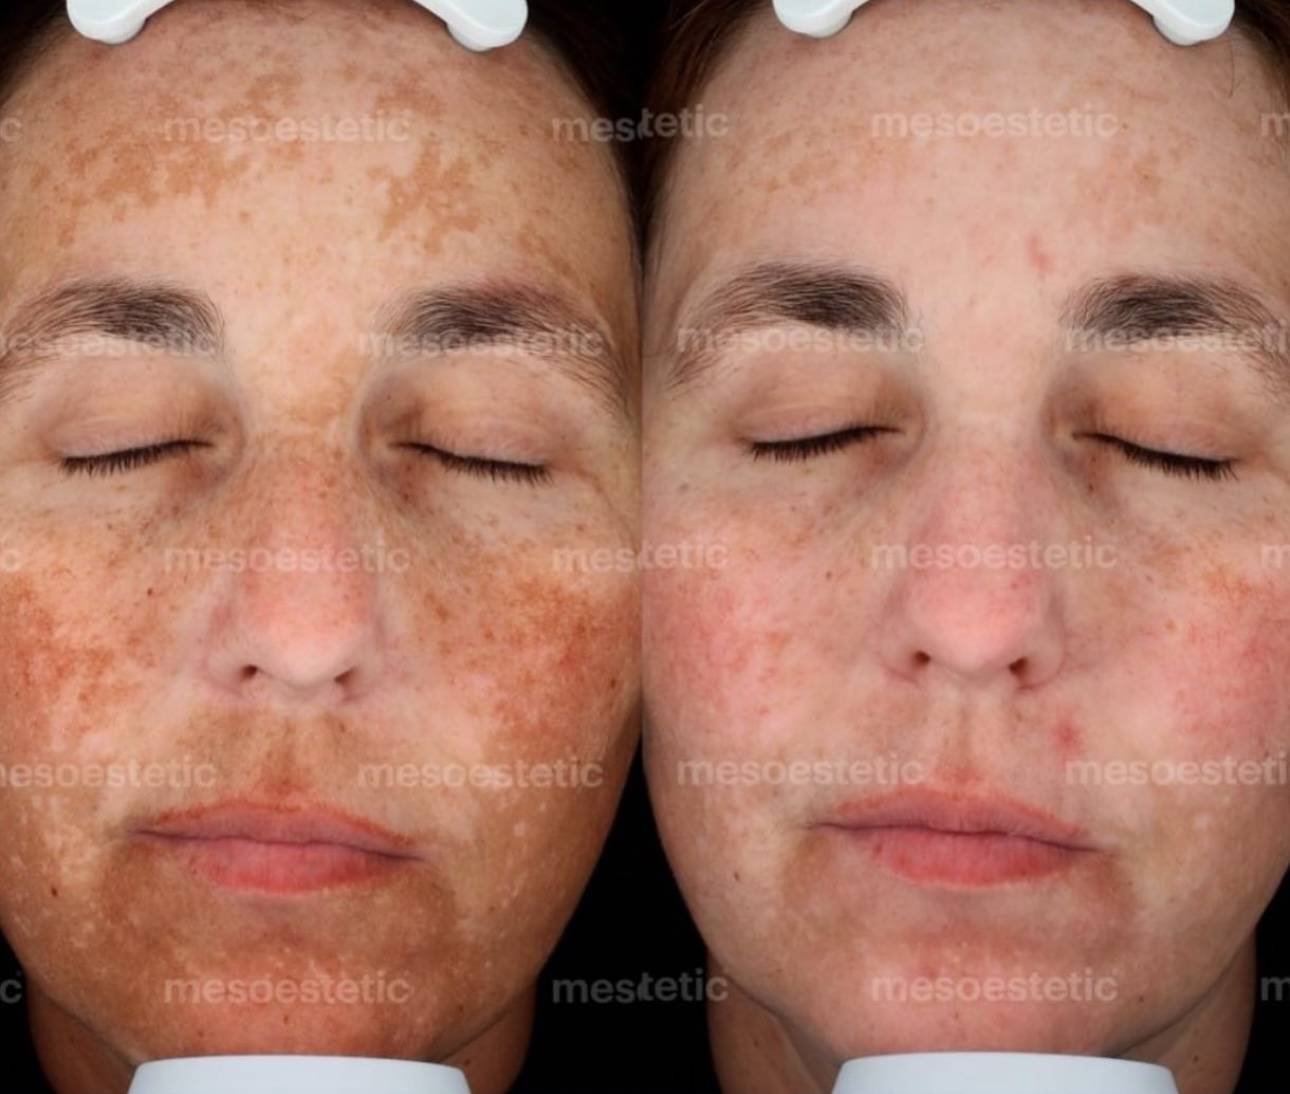 Before and after comparison of a facial treatment. The left side shows a face with significant hyperpigmentation and freckles, and the right side shows the same face with noticeably reduced discoloration after